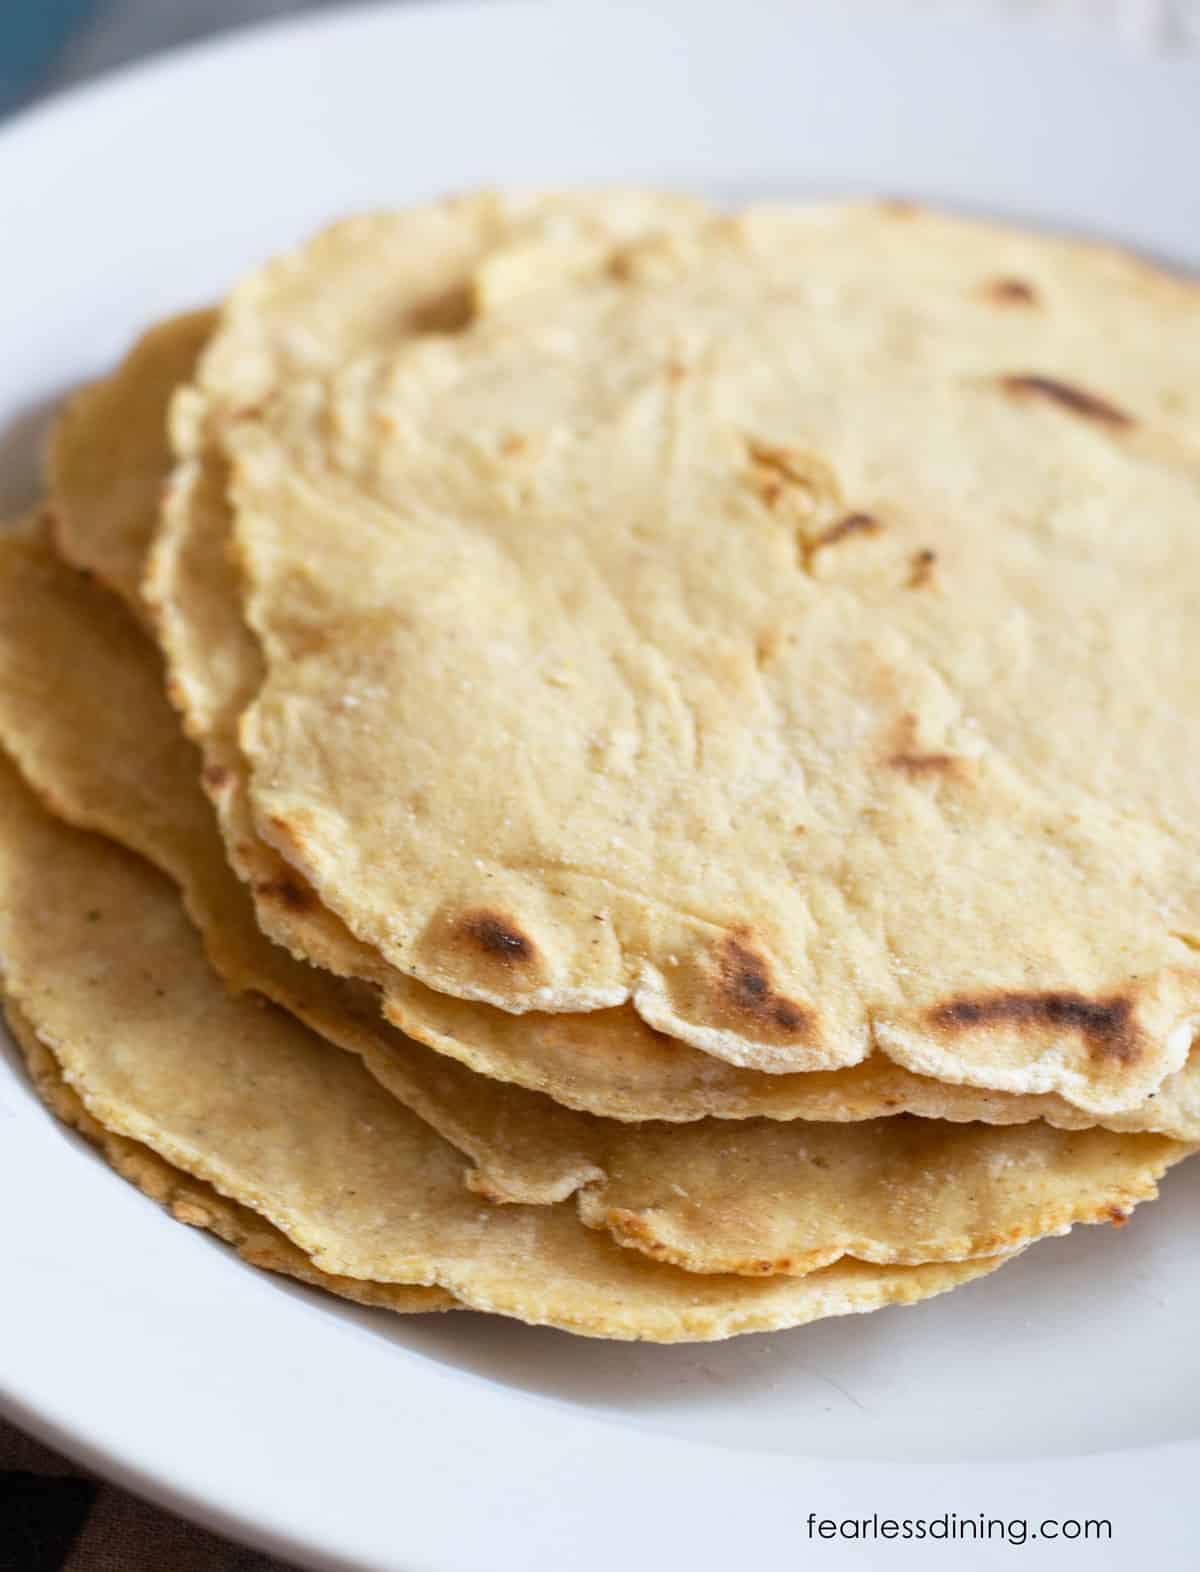 A closeup of the cooked corn tortillas so you can see the char marks.